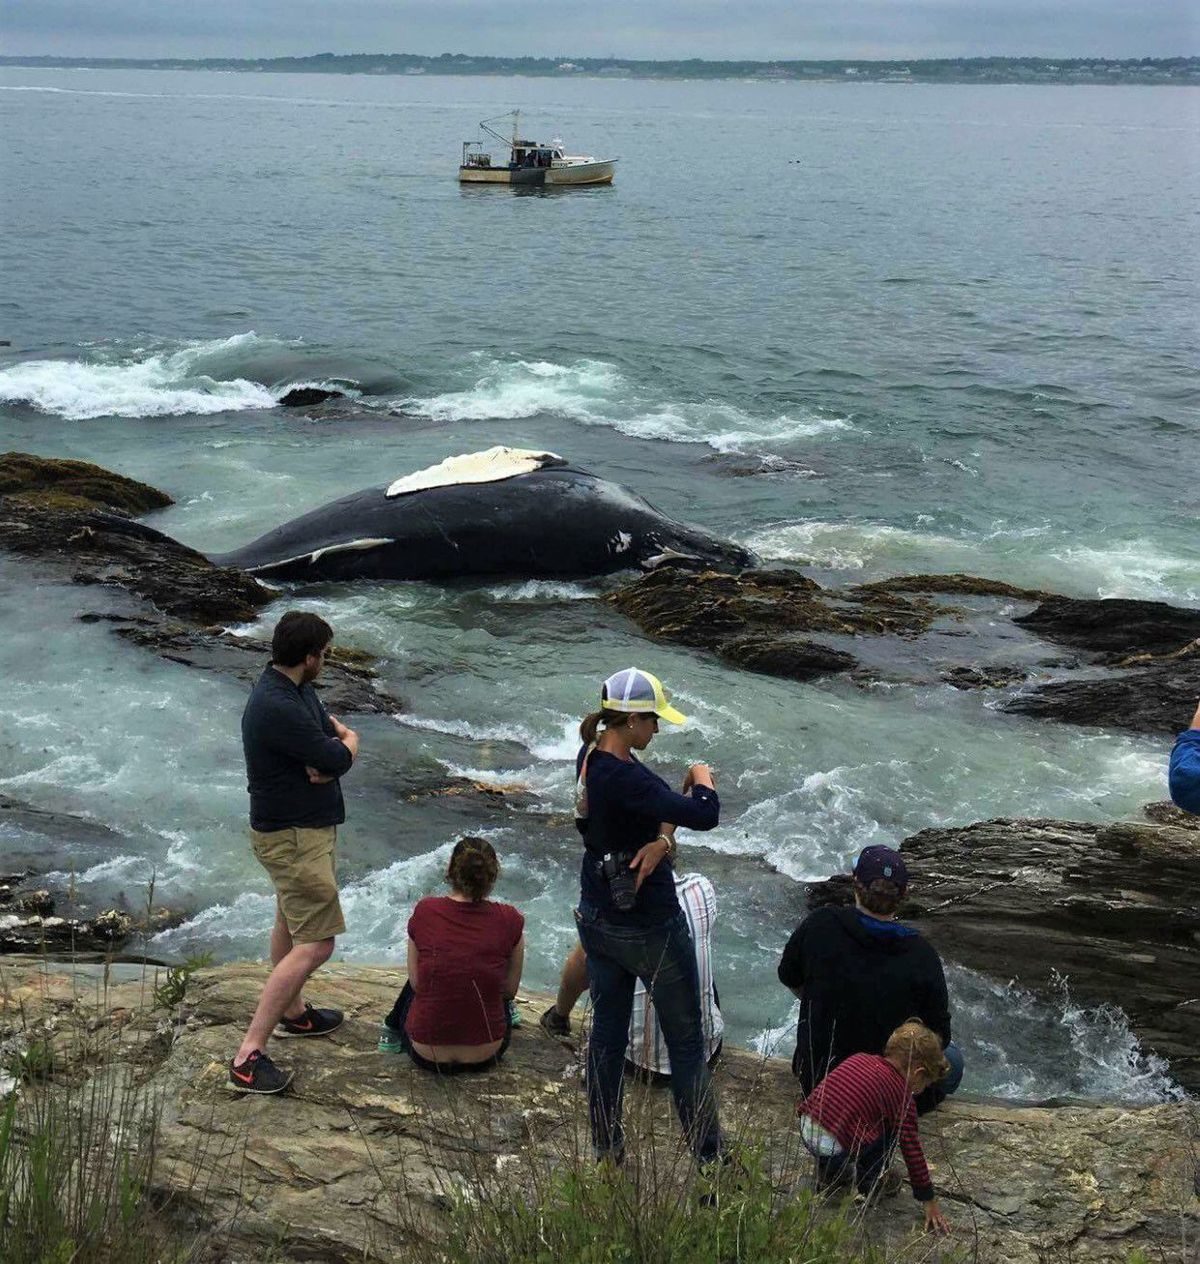 People view a humpback whale that washed ashore in Jamestown on Friday